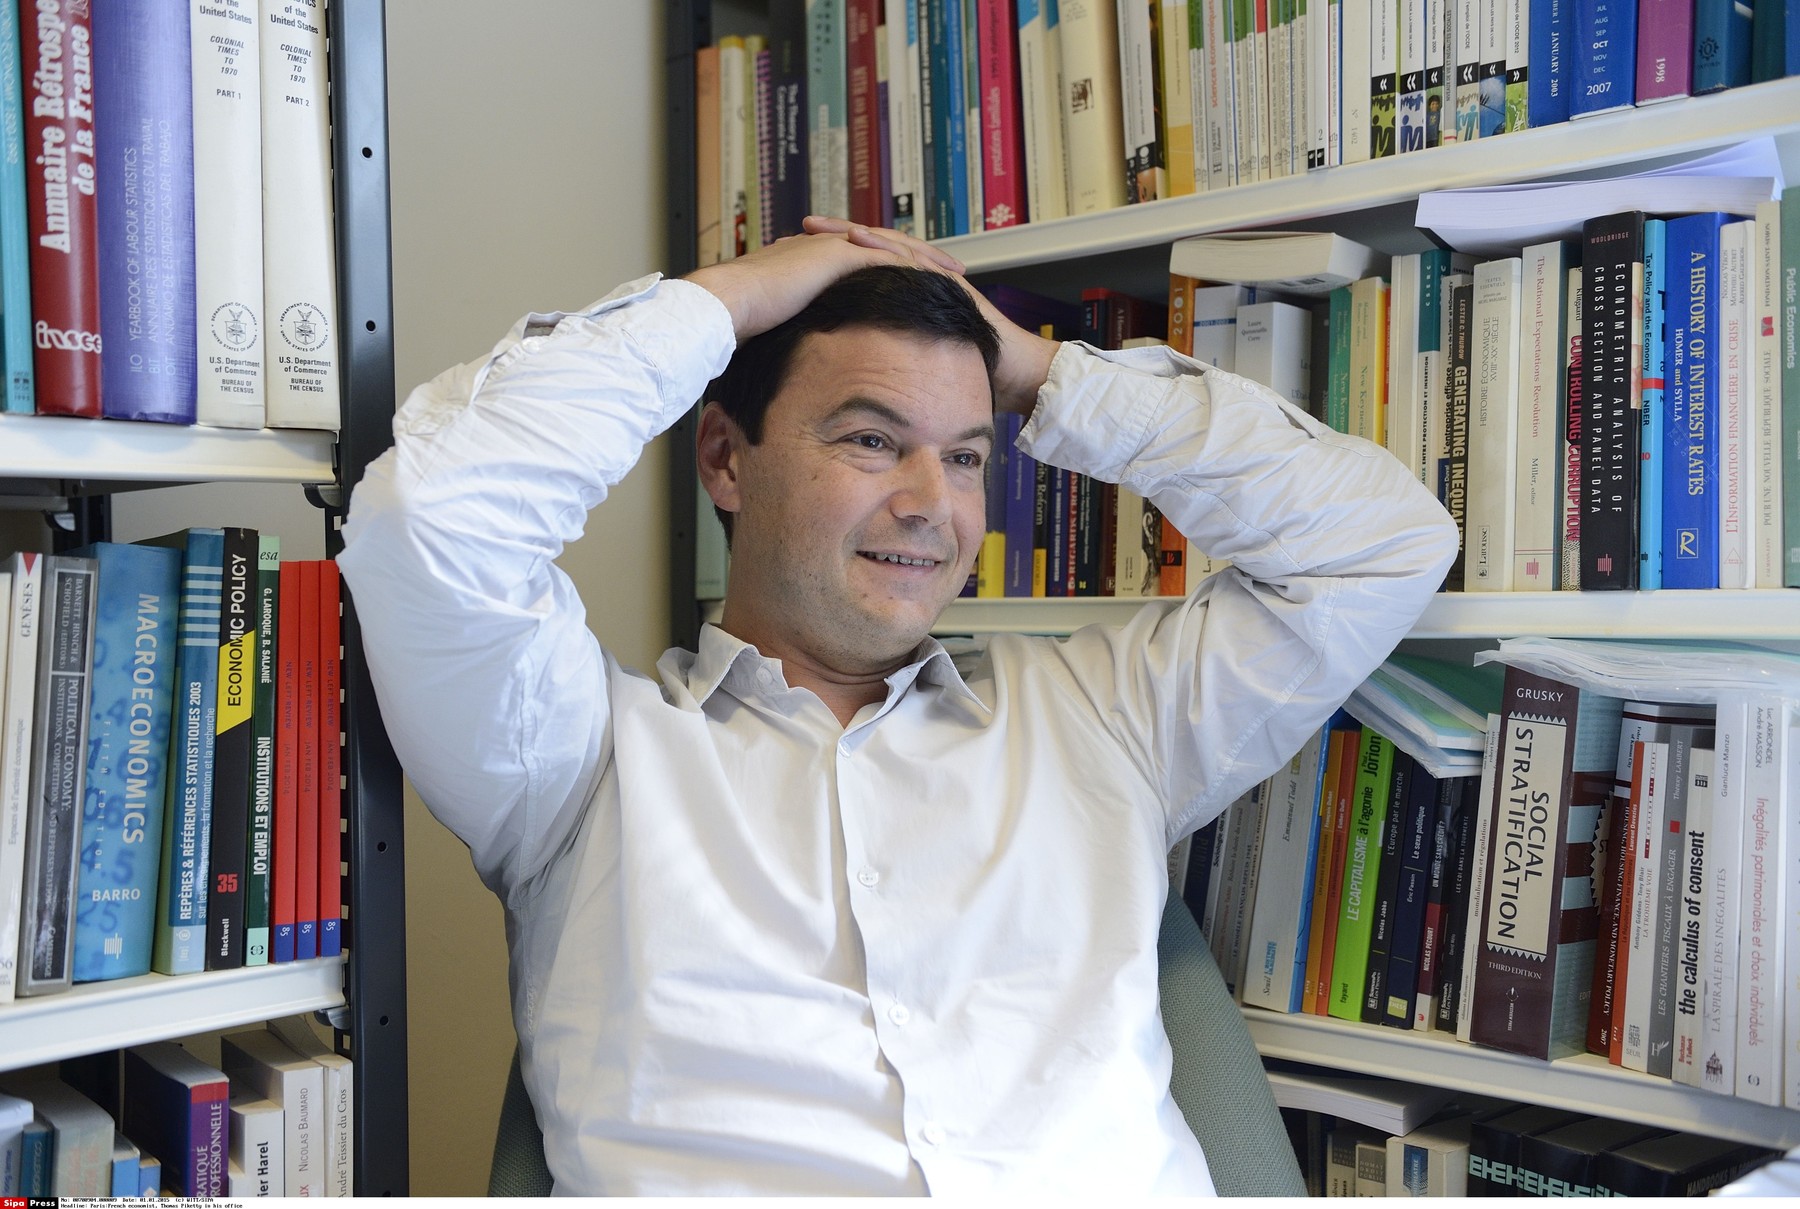 Thomas Piketty.
French economist, Thomas Piketty in his office.
Paris, FRANCE-30/09/14/WITT_CHOIX009/Credit:WITT/SIPA/1501011846, Image: 234776947, License: Rights-managed, Restrictions: , Model Release: no, Credit line: WITT / Sipa Press / Profimedia